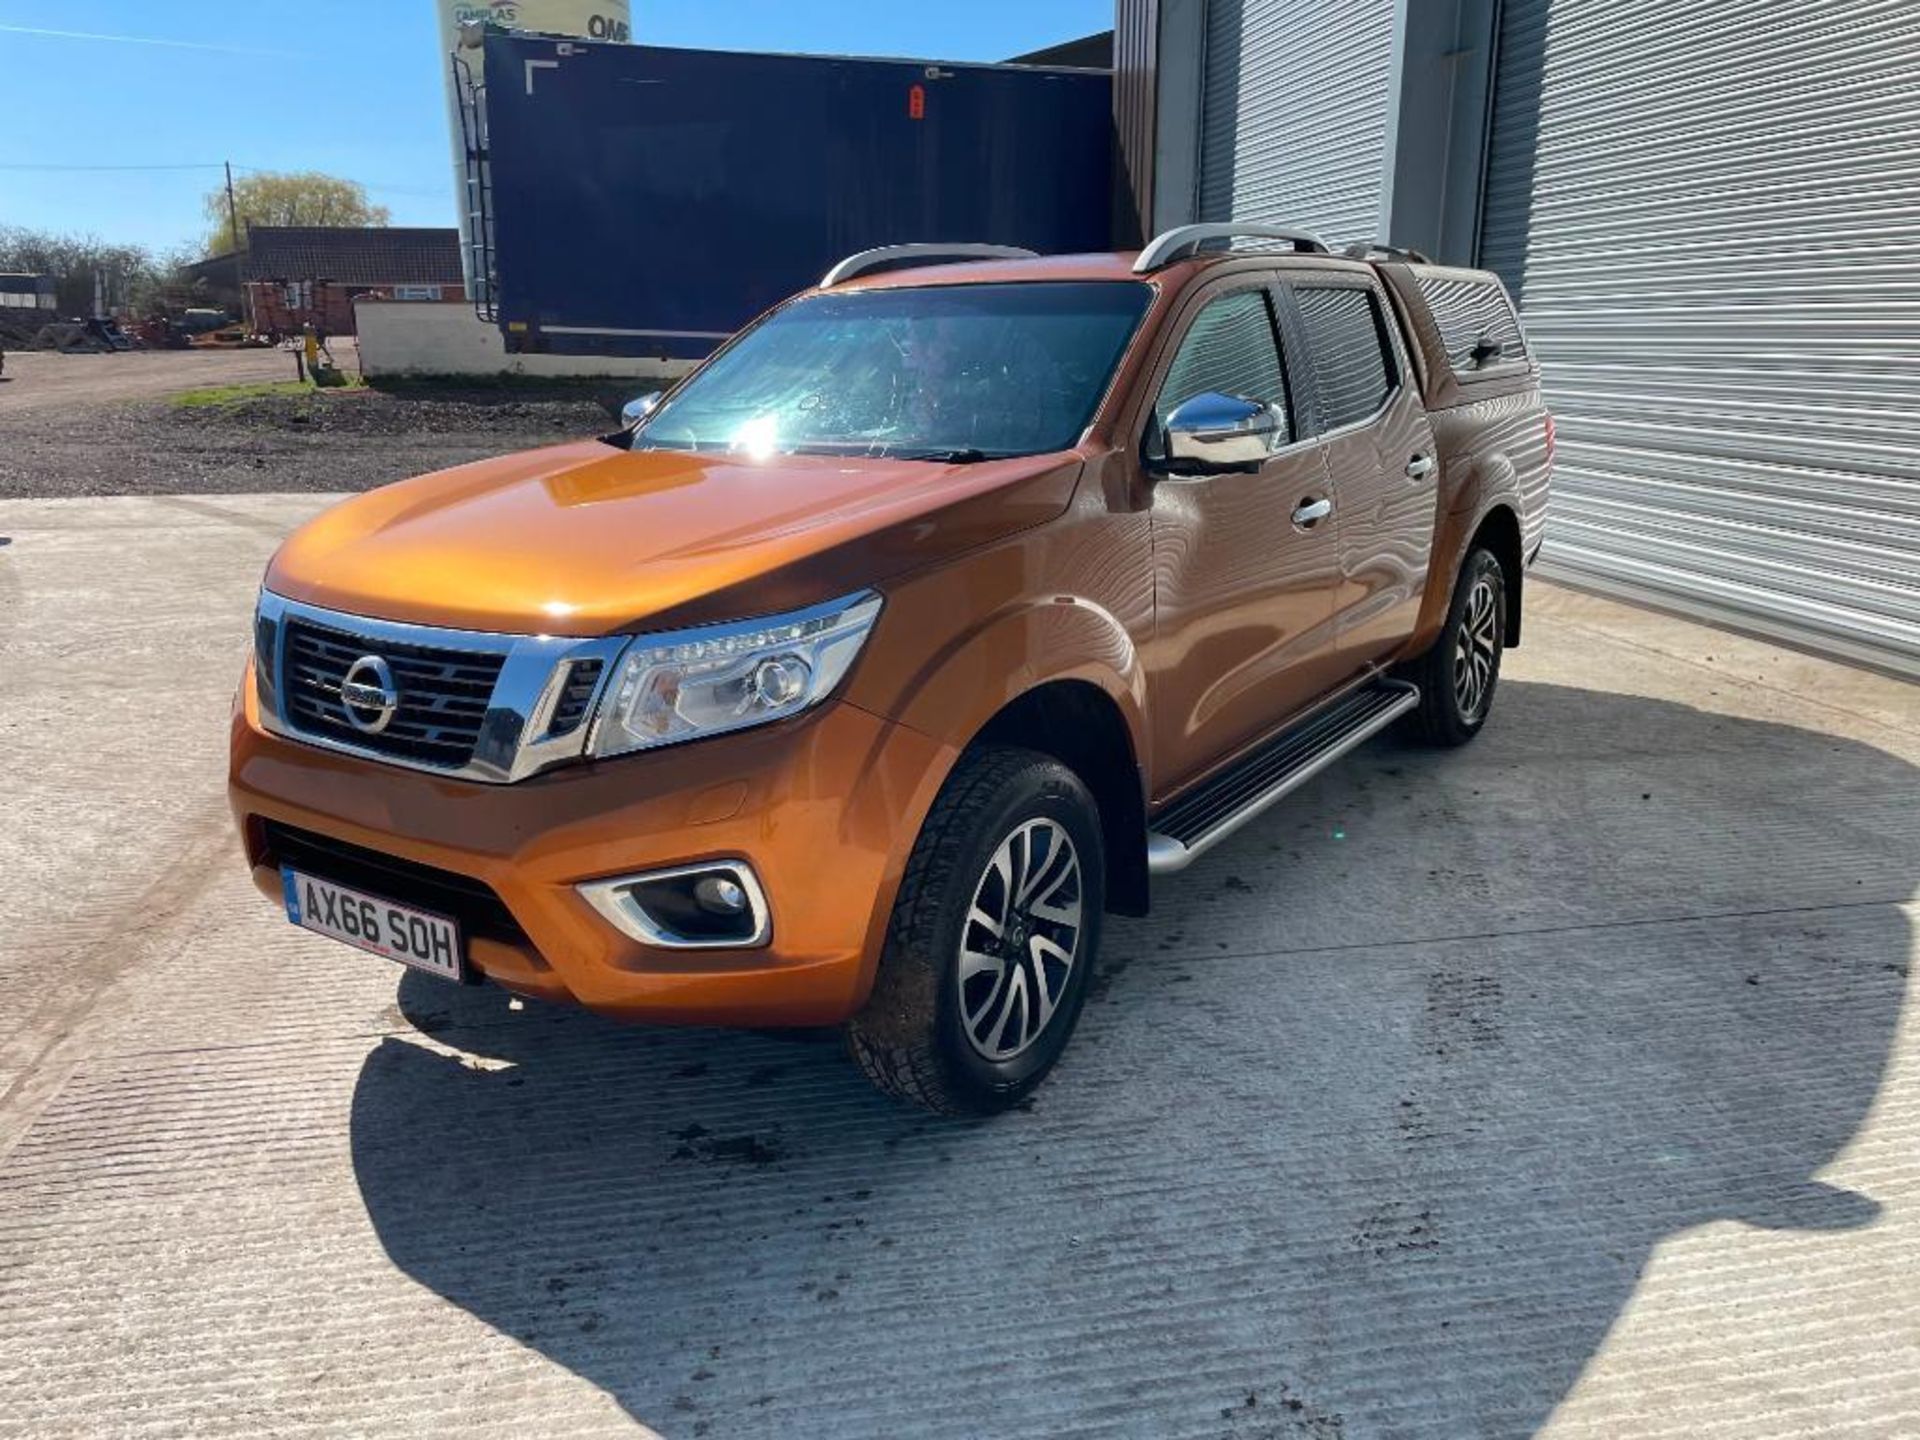 2016 Nissan Navara Techna 4wd pickup with Pegasus hard top, 4 door, diesel, automatic, leather uphol - Image 5 of 14